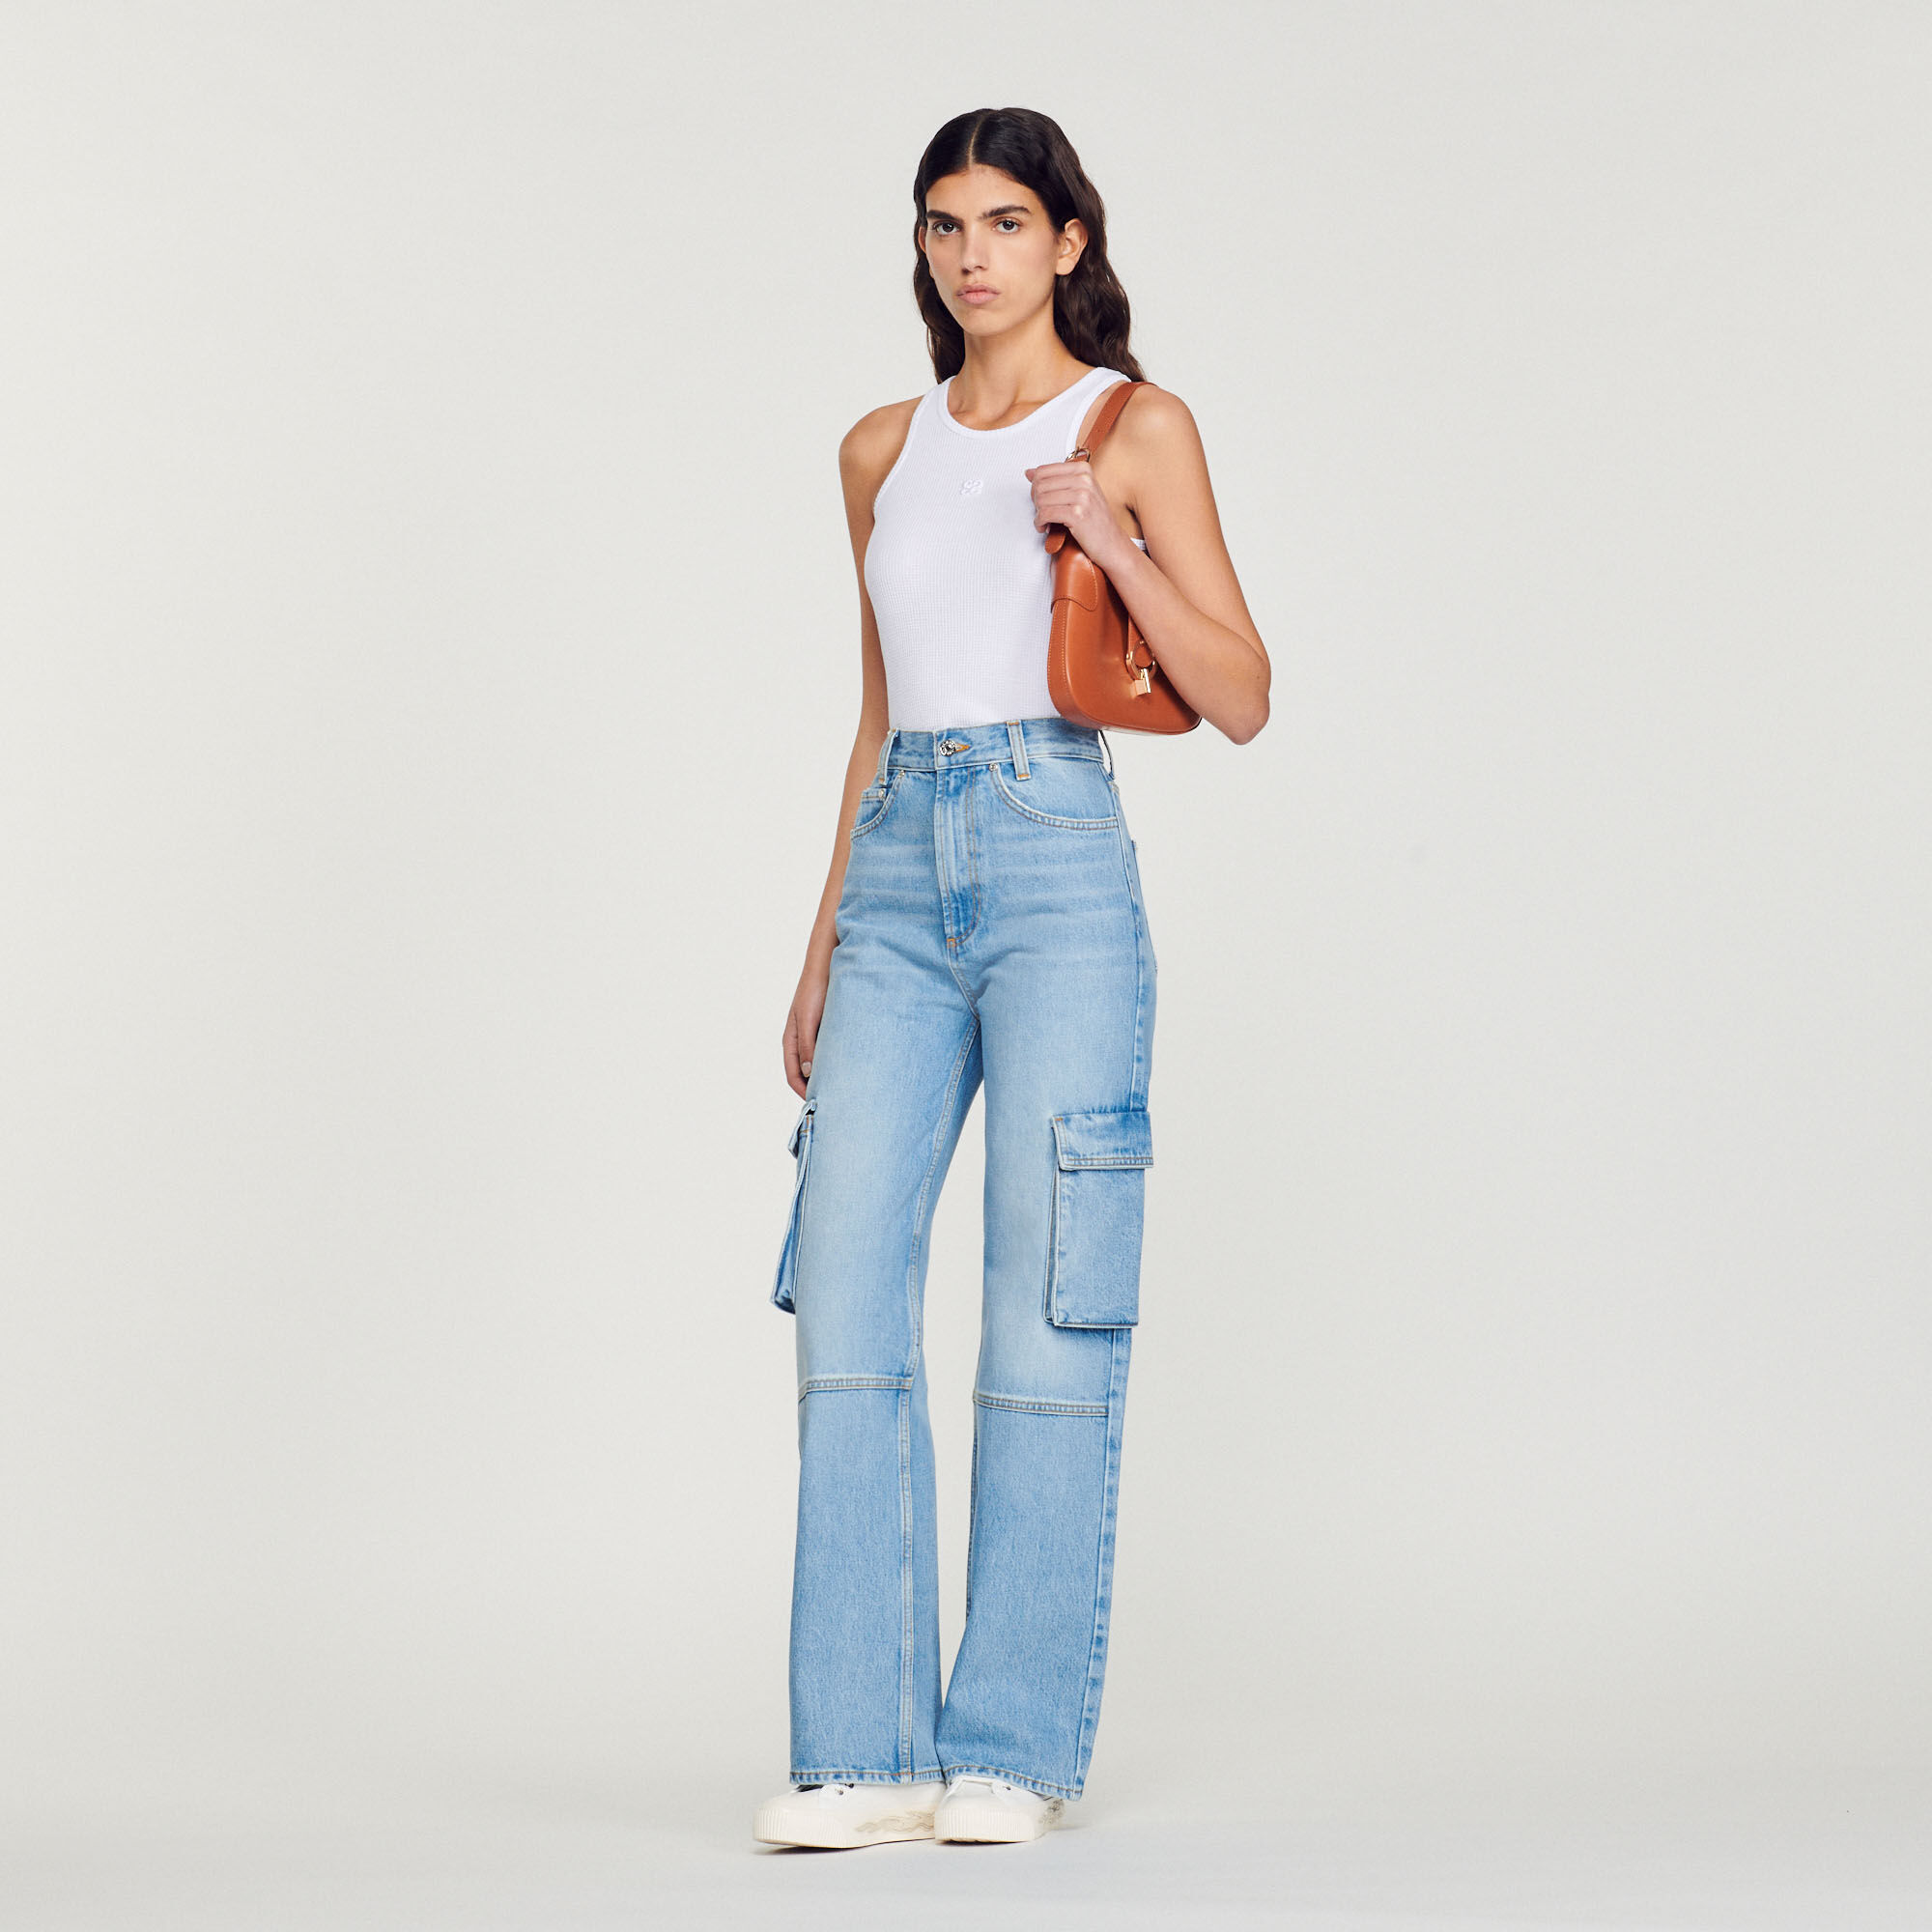 Women's jeans - New Collection | Sandro